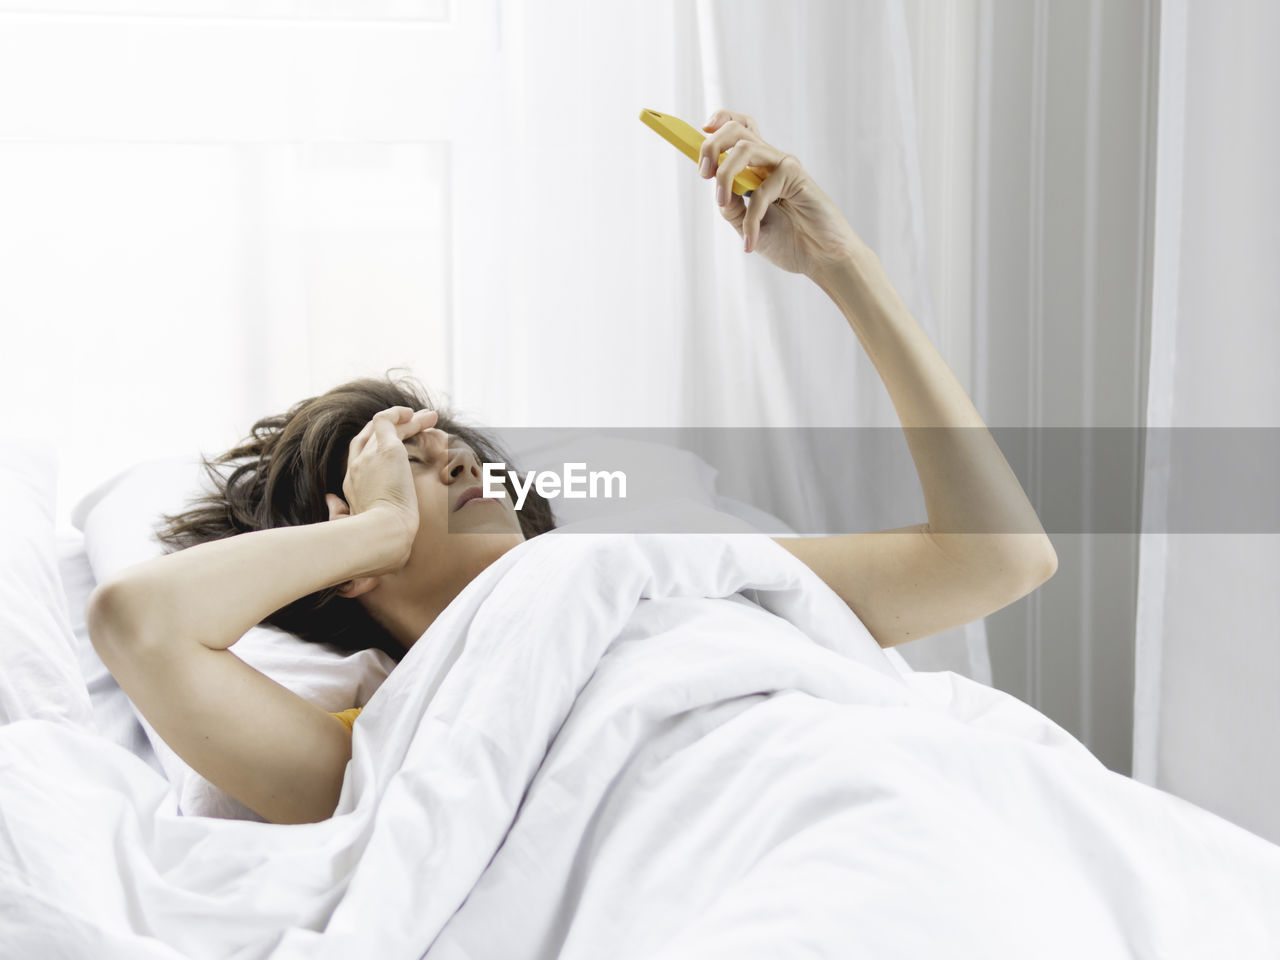 Sleepy woman looks on smartphone screen. checking e-mail box right after waking up. 